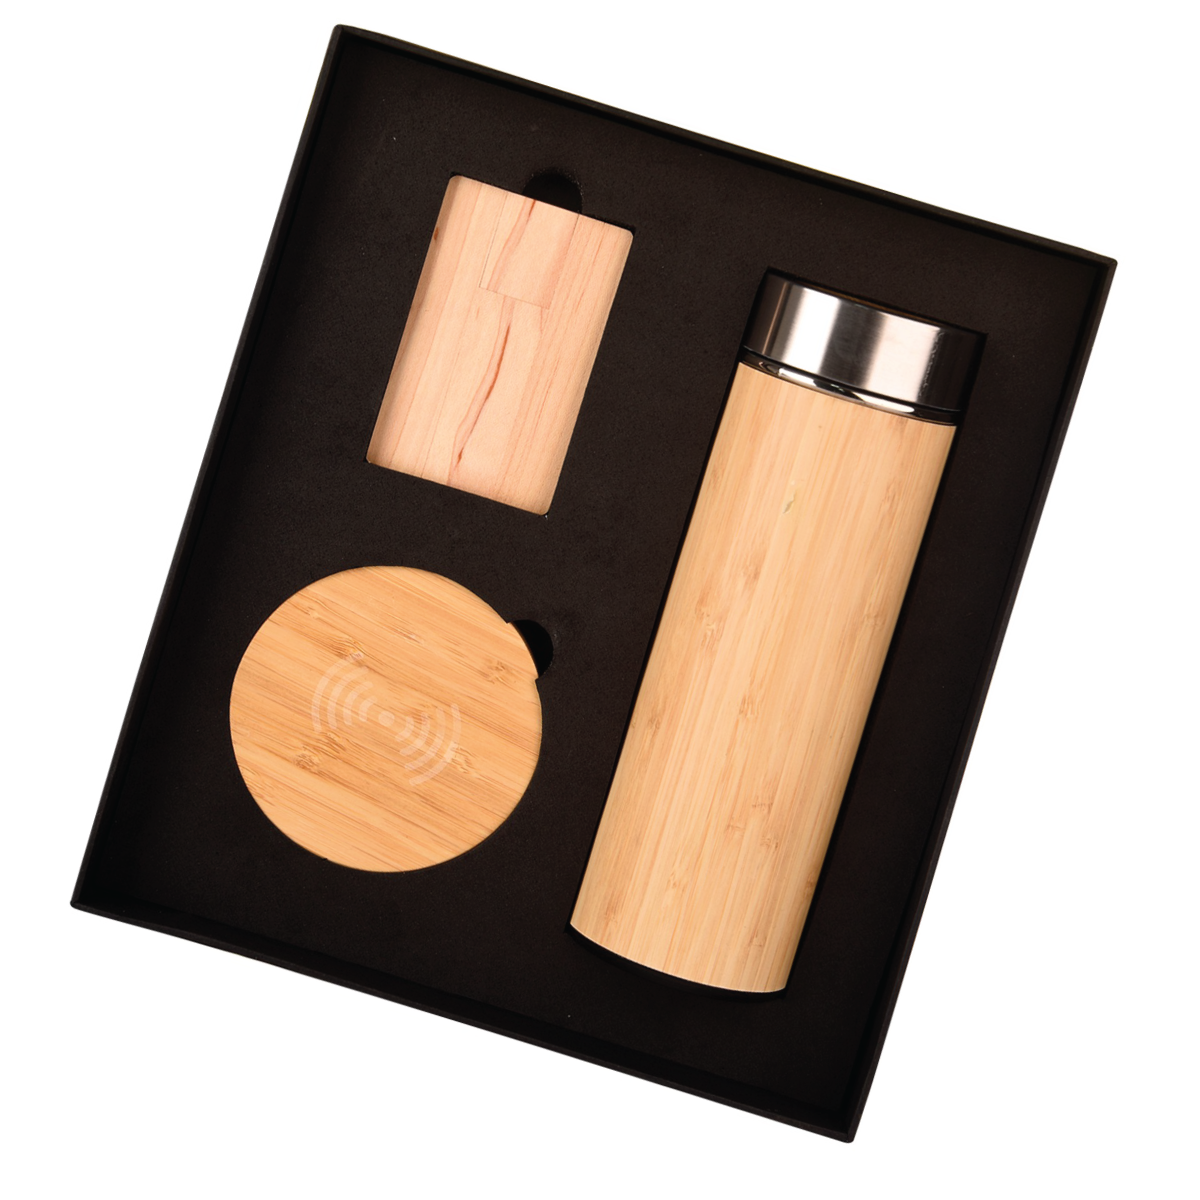 3in1 Wooden Bottle, Pen Drive, and Wireless Charger Premium Combo Gift Set - For Employee Joining Kit, Corporate Gifting, Diwali Gifting, Return Gift HK140923